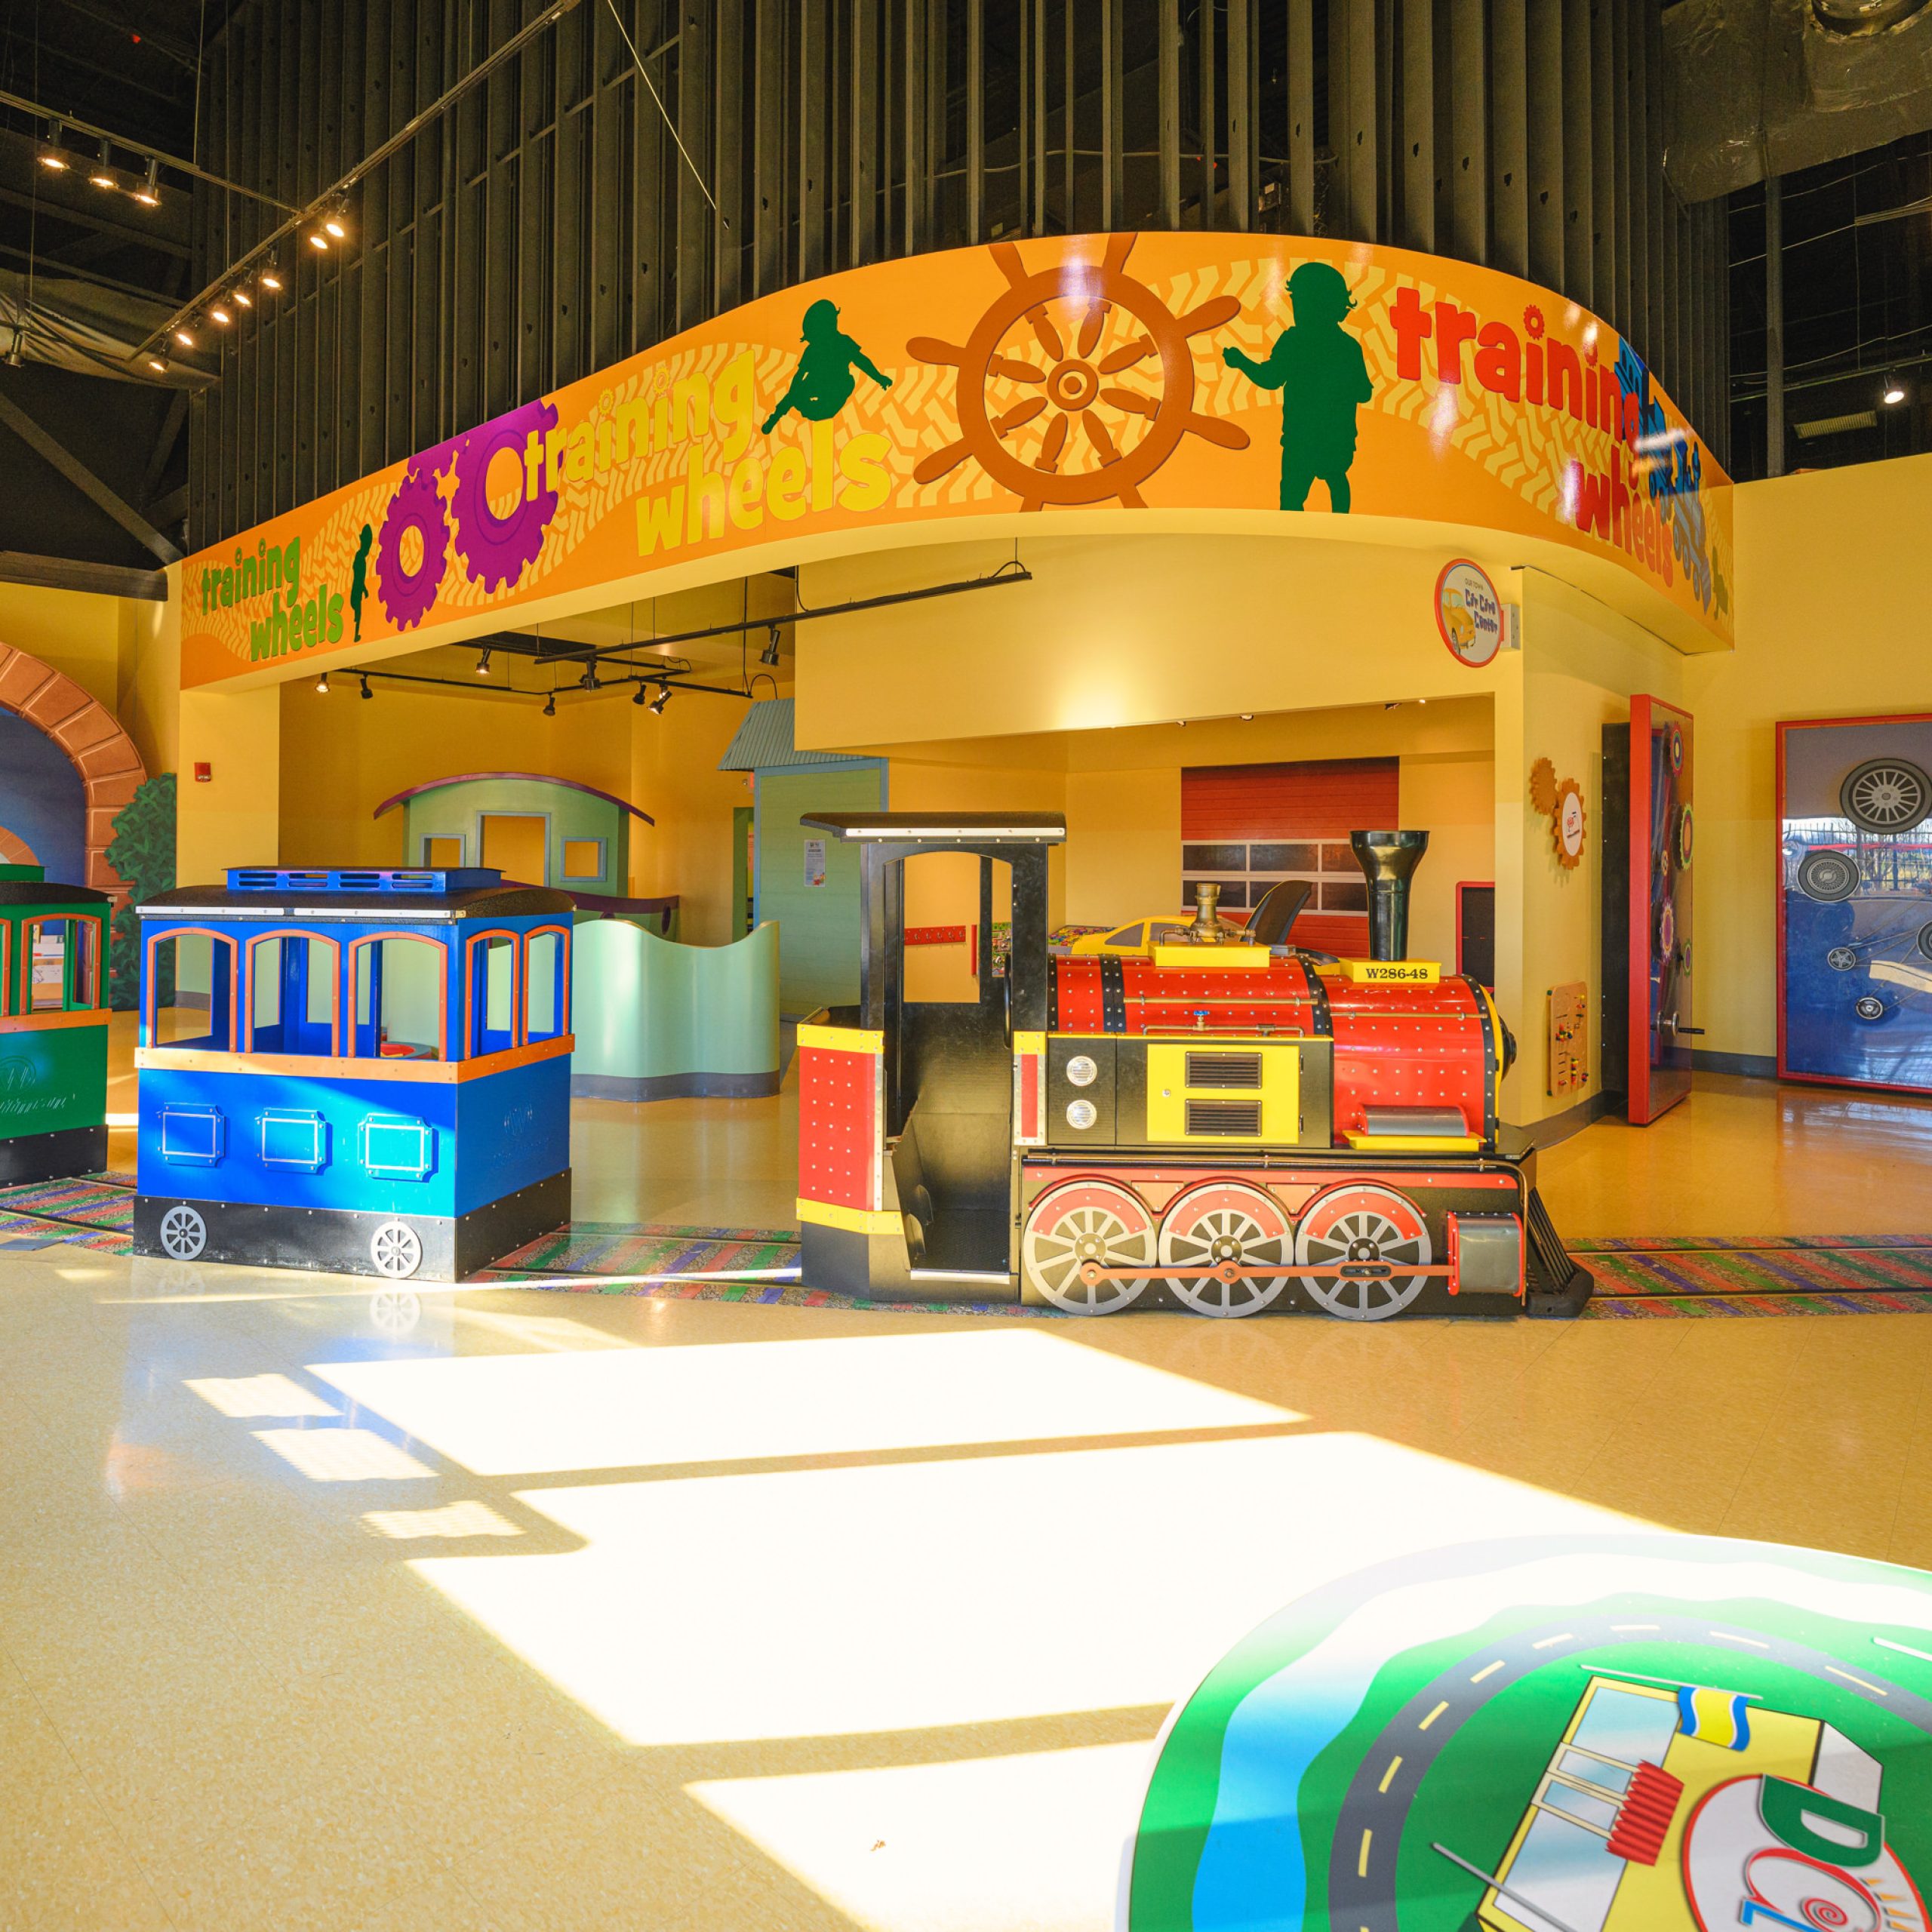 A picture of the Training Wheels exhibit